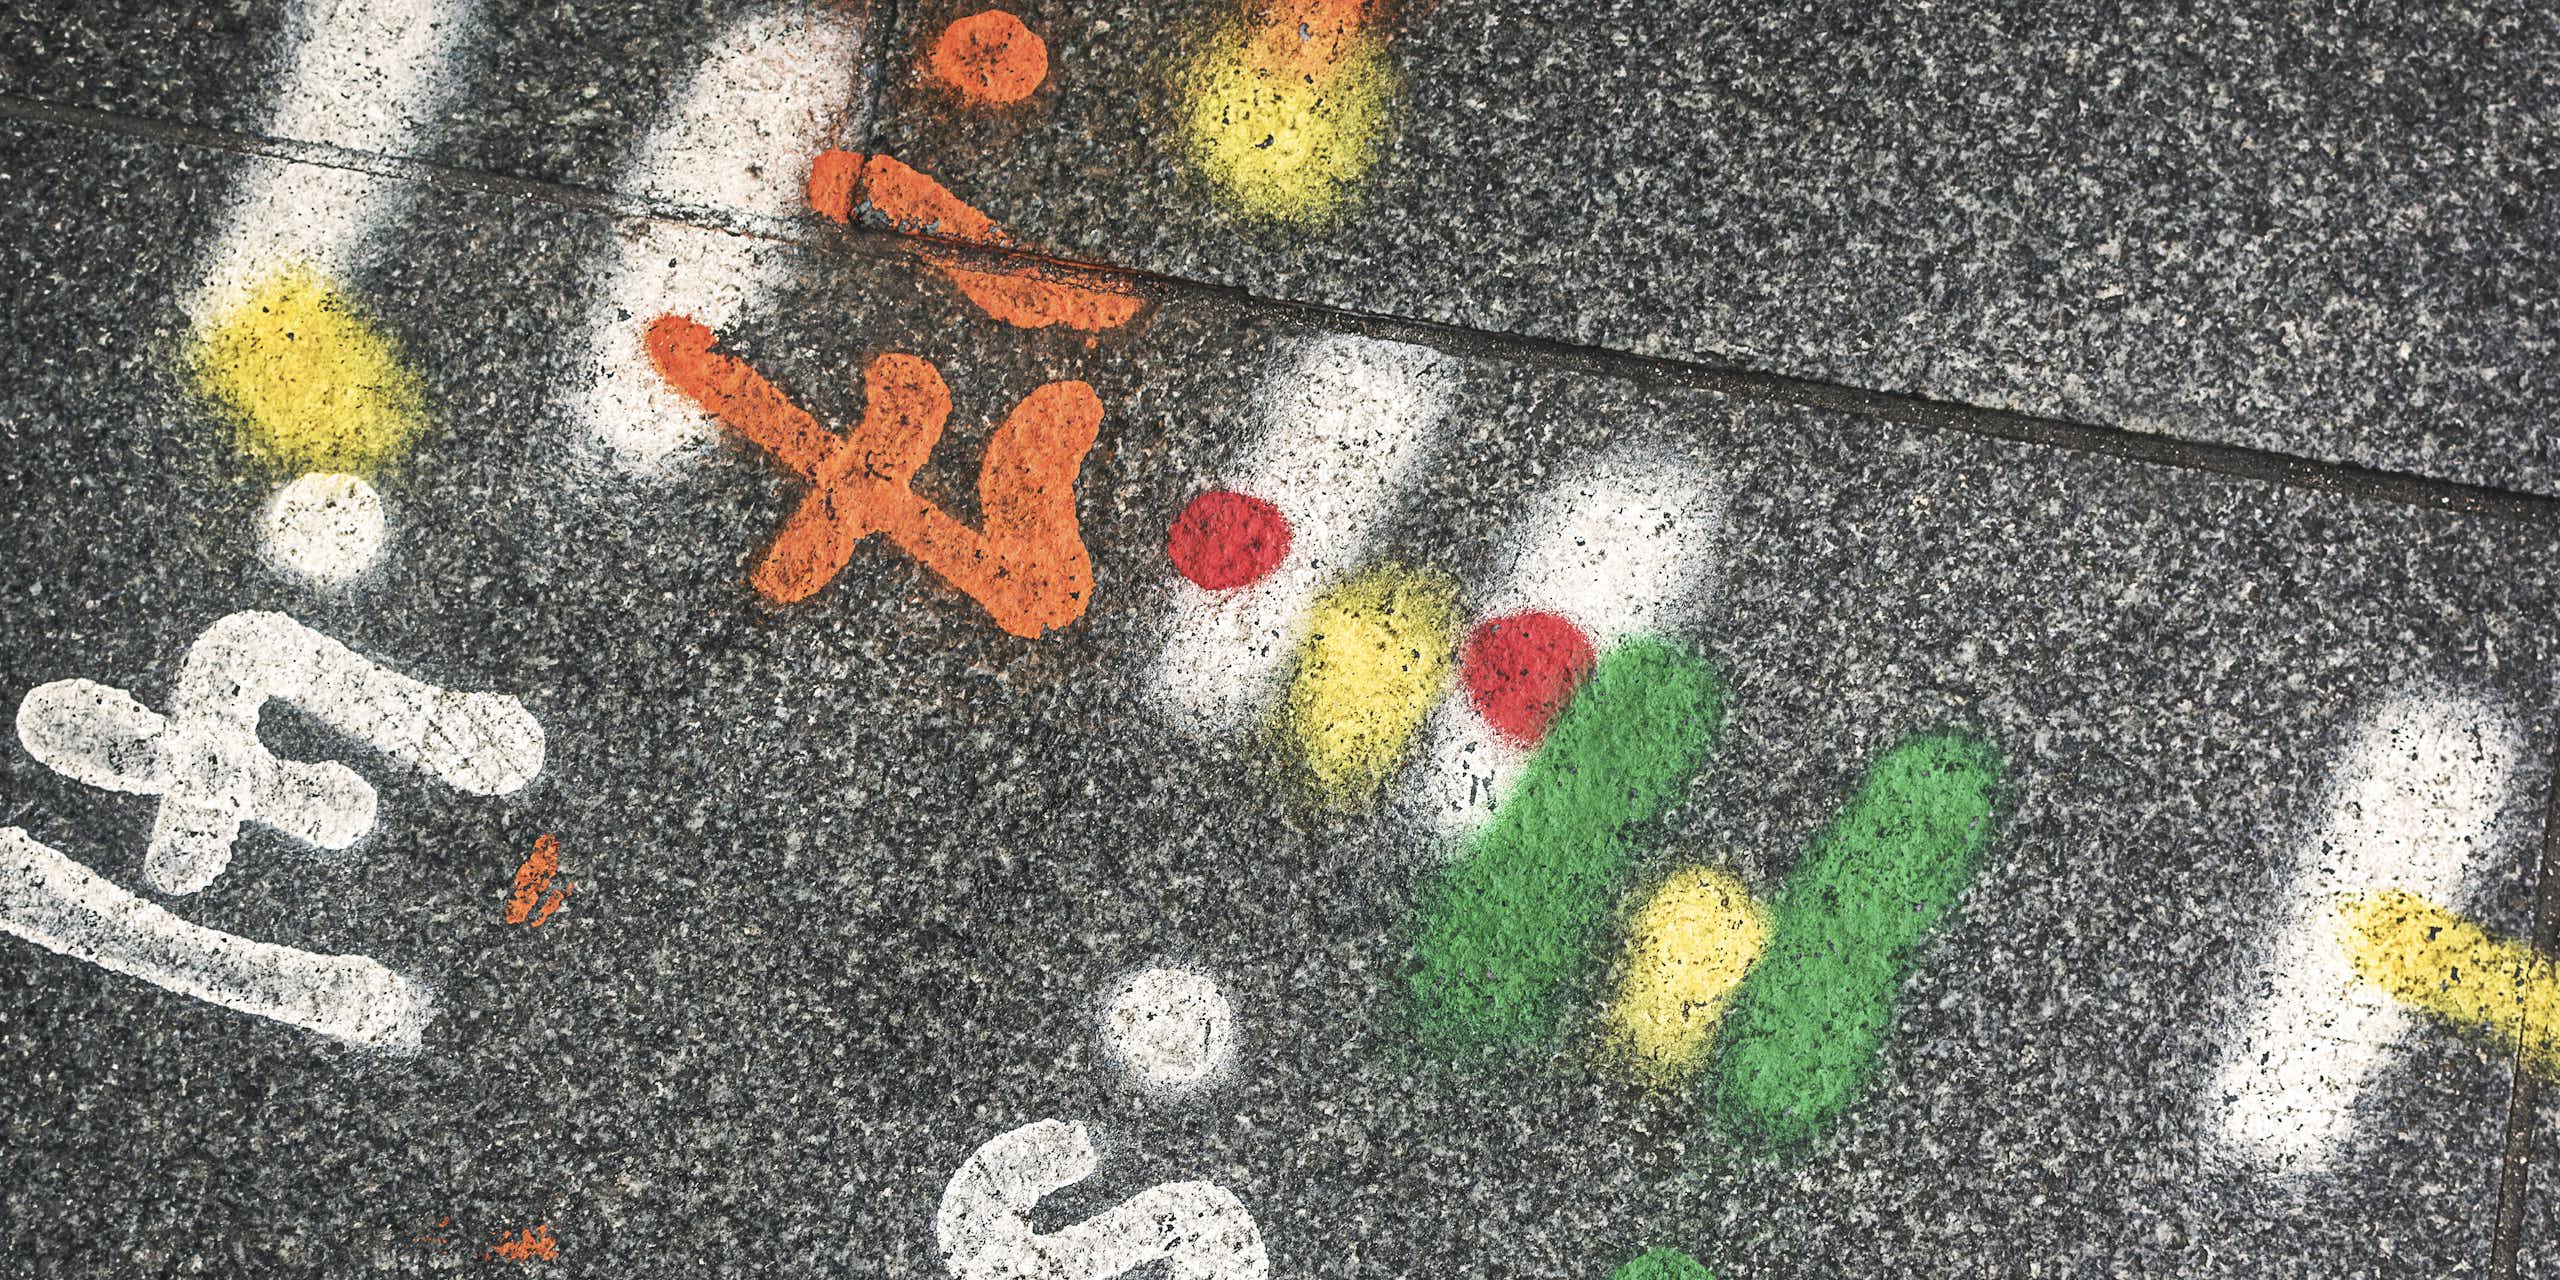 Engineering marks on a road surface.